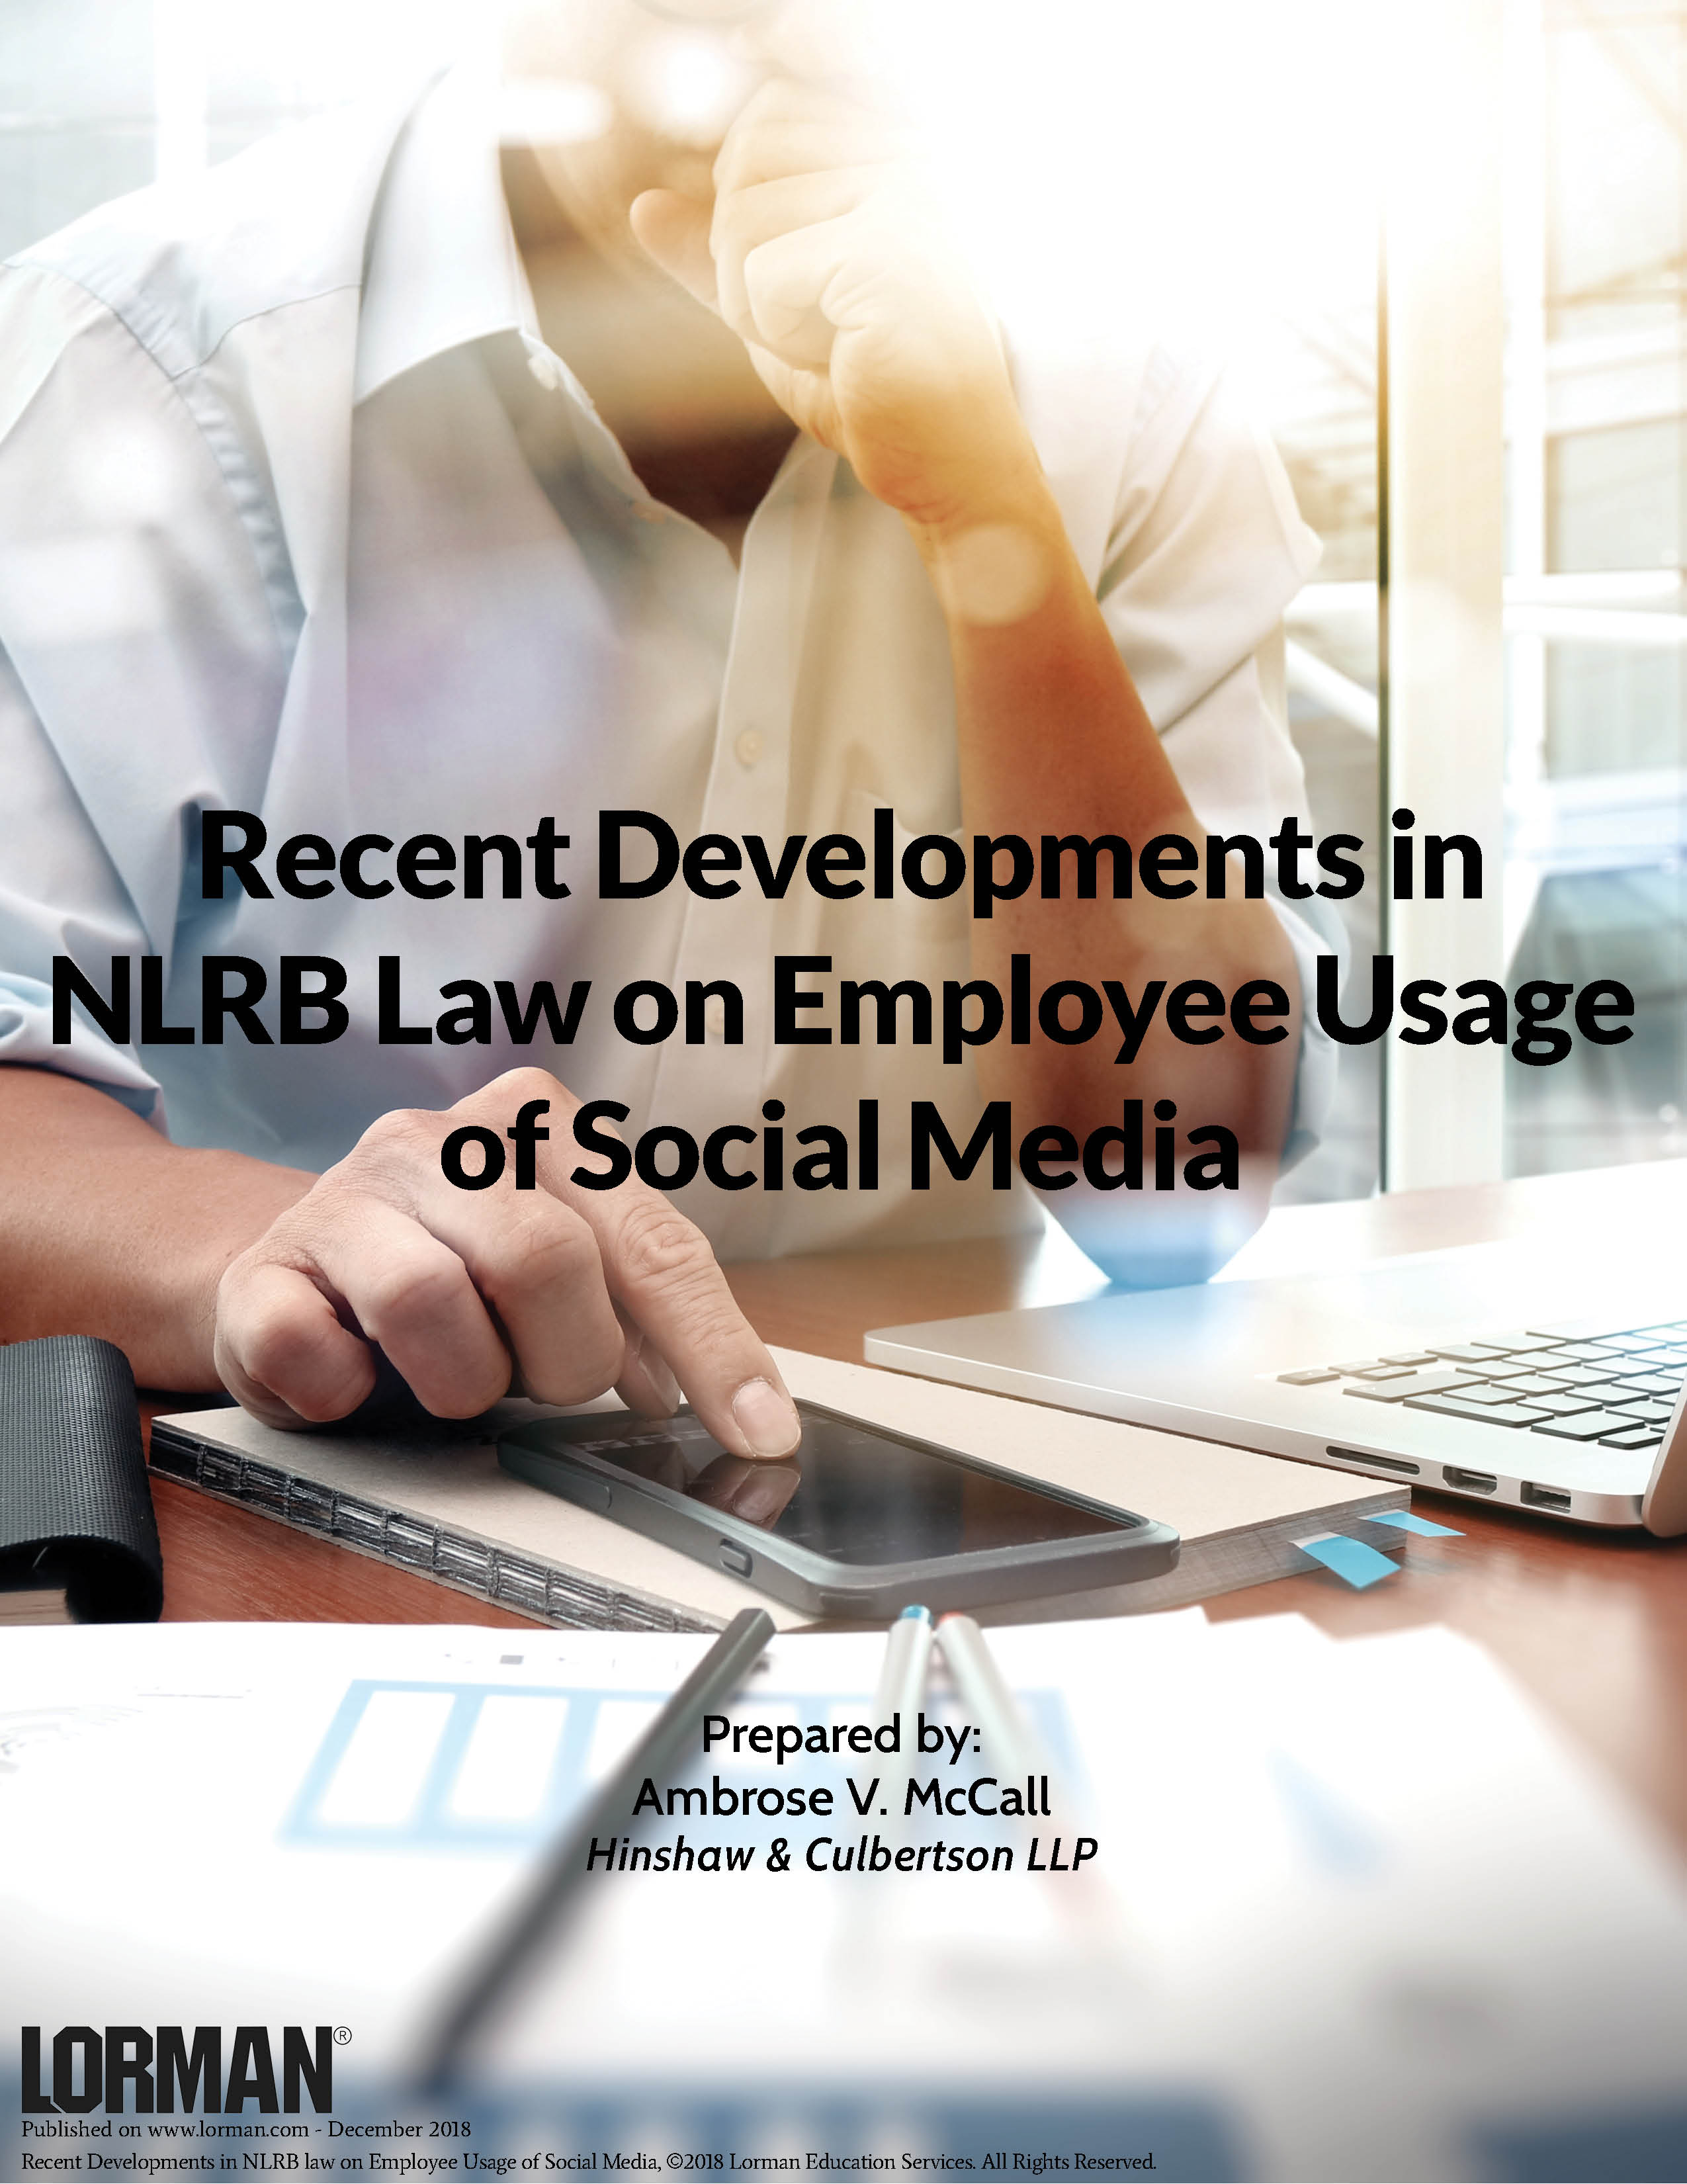 Recent Developments in NLRB law on Employee Usage of Social Media